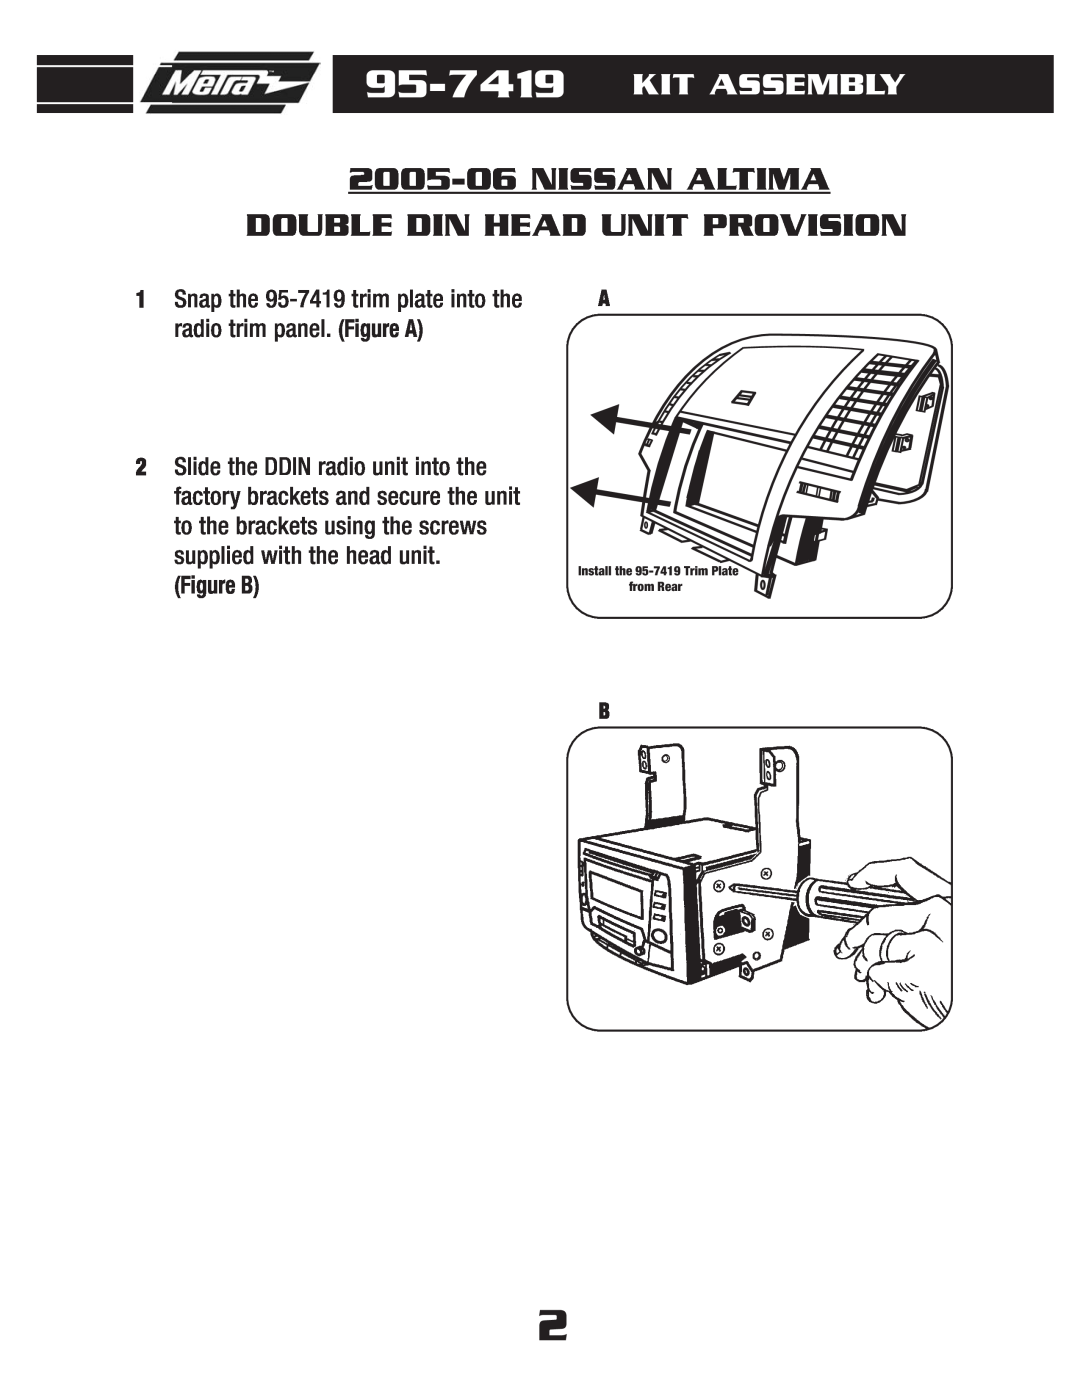 Metra Electronics 95-7419 installation instructions Nissan Altima Double Din Head Unit Provision, Kit Assembly, Figure B 